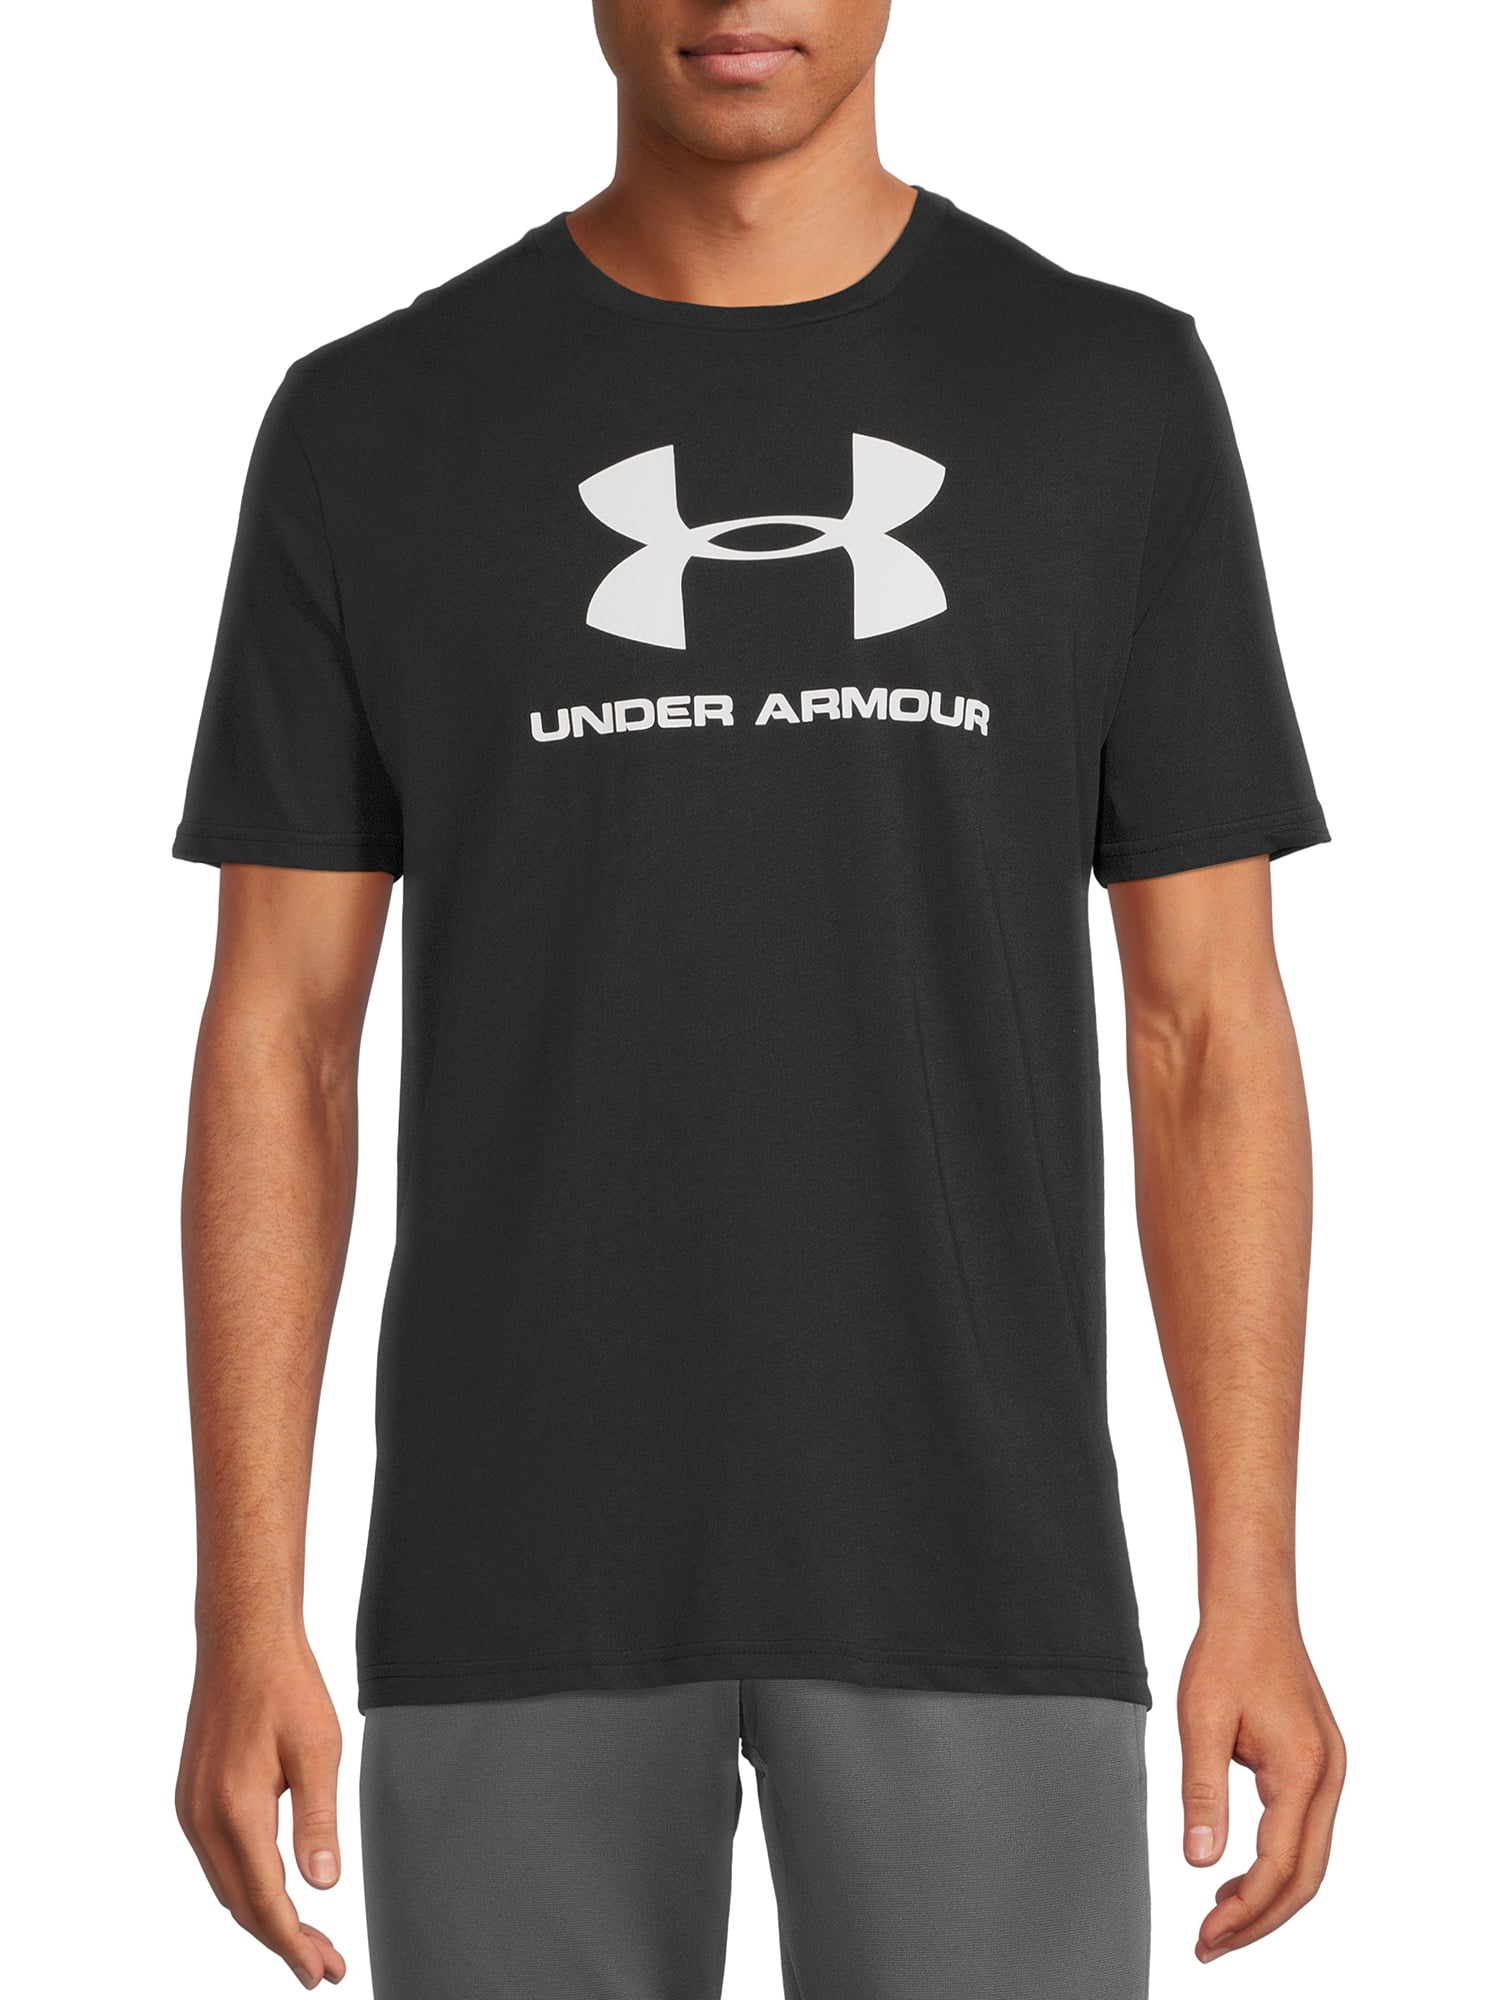 Under Armour Men's Sportstyle Logo Short Sleeve Graphic Tee NWT 